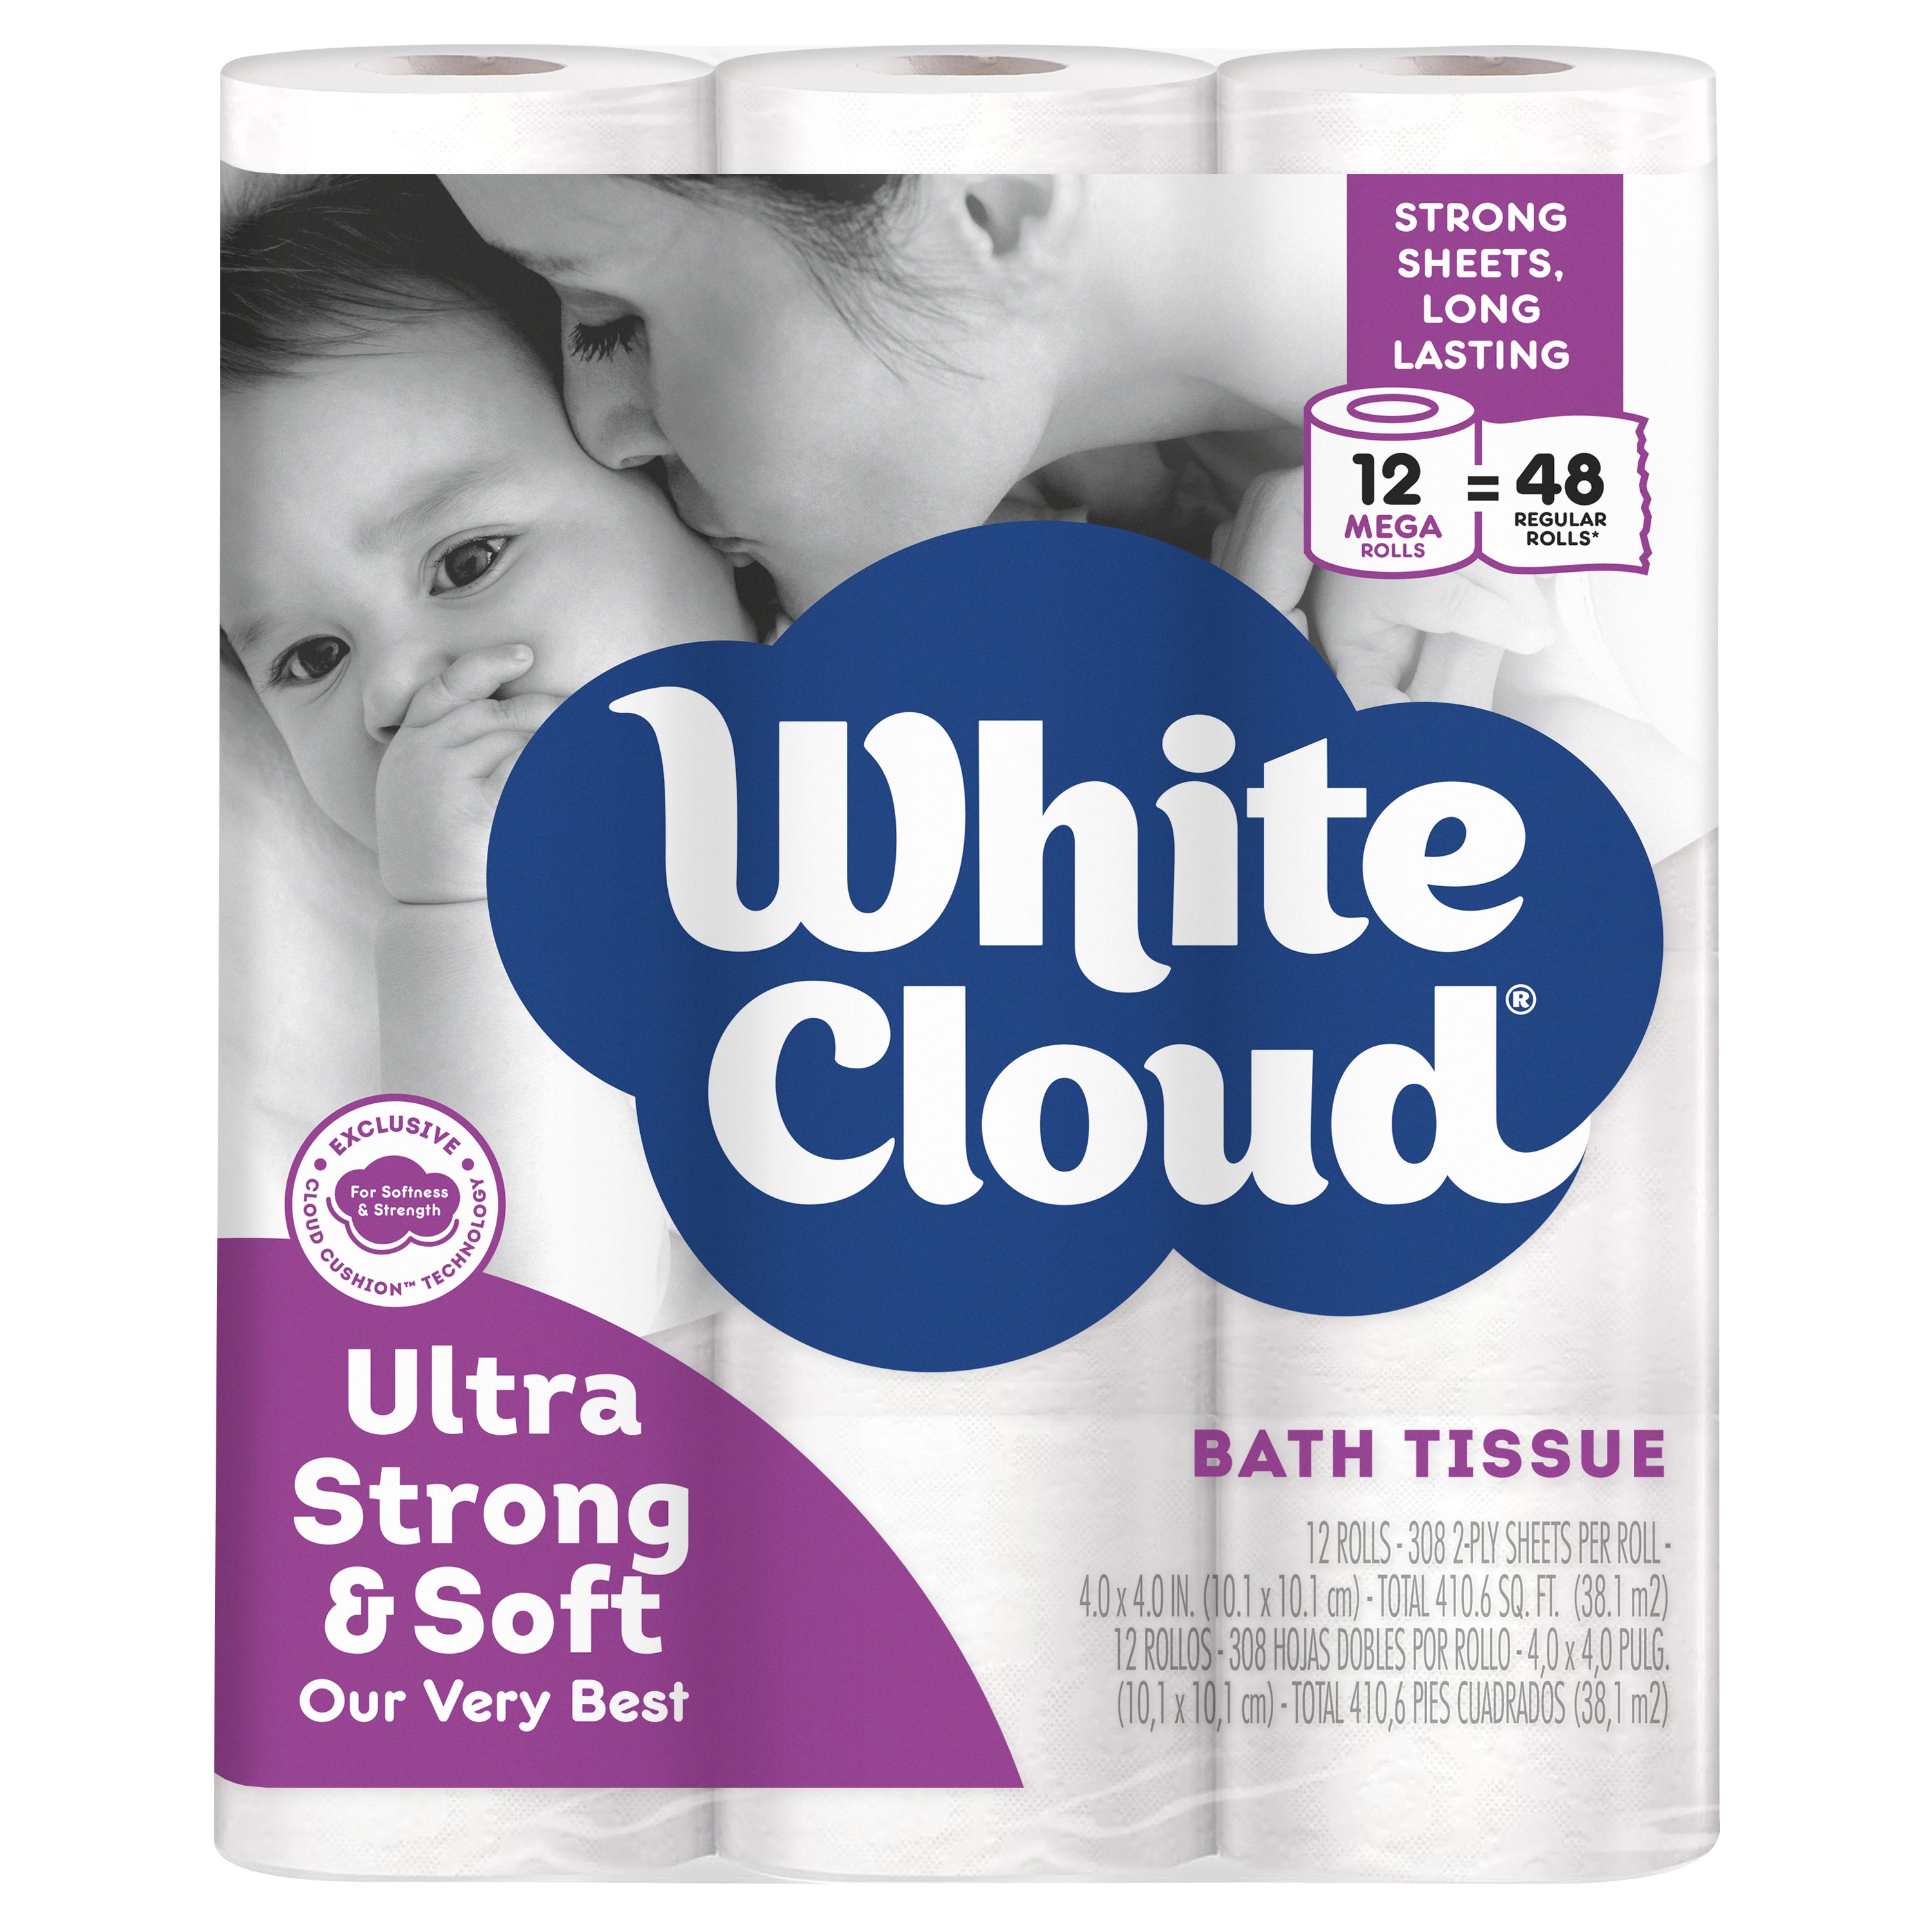 White Cloud Ultra Strong & Soft Toilet Paper, 12 Mega Rolls - image 1 of 6